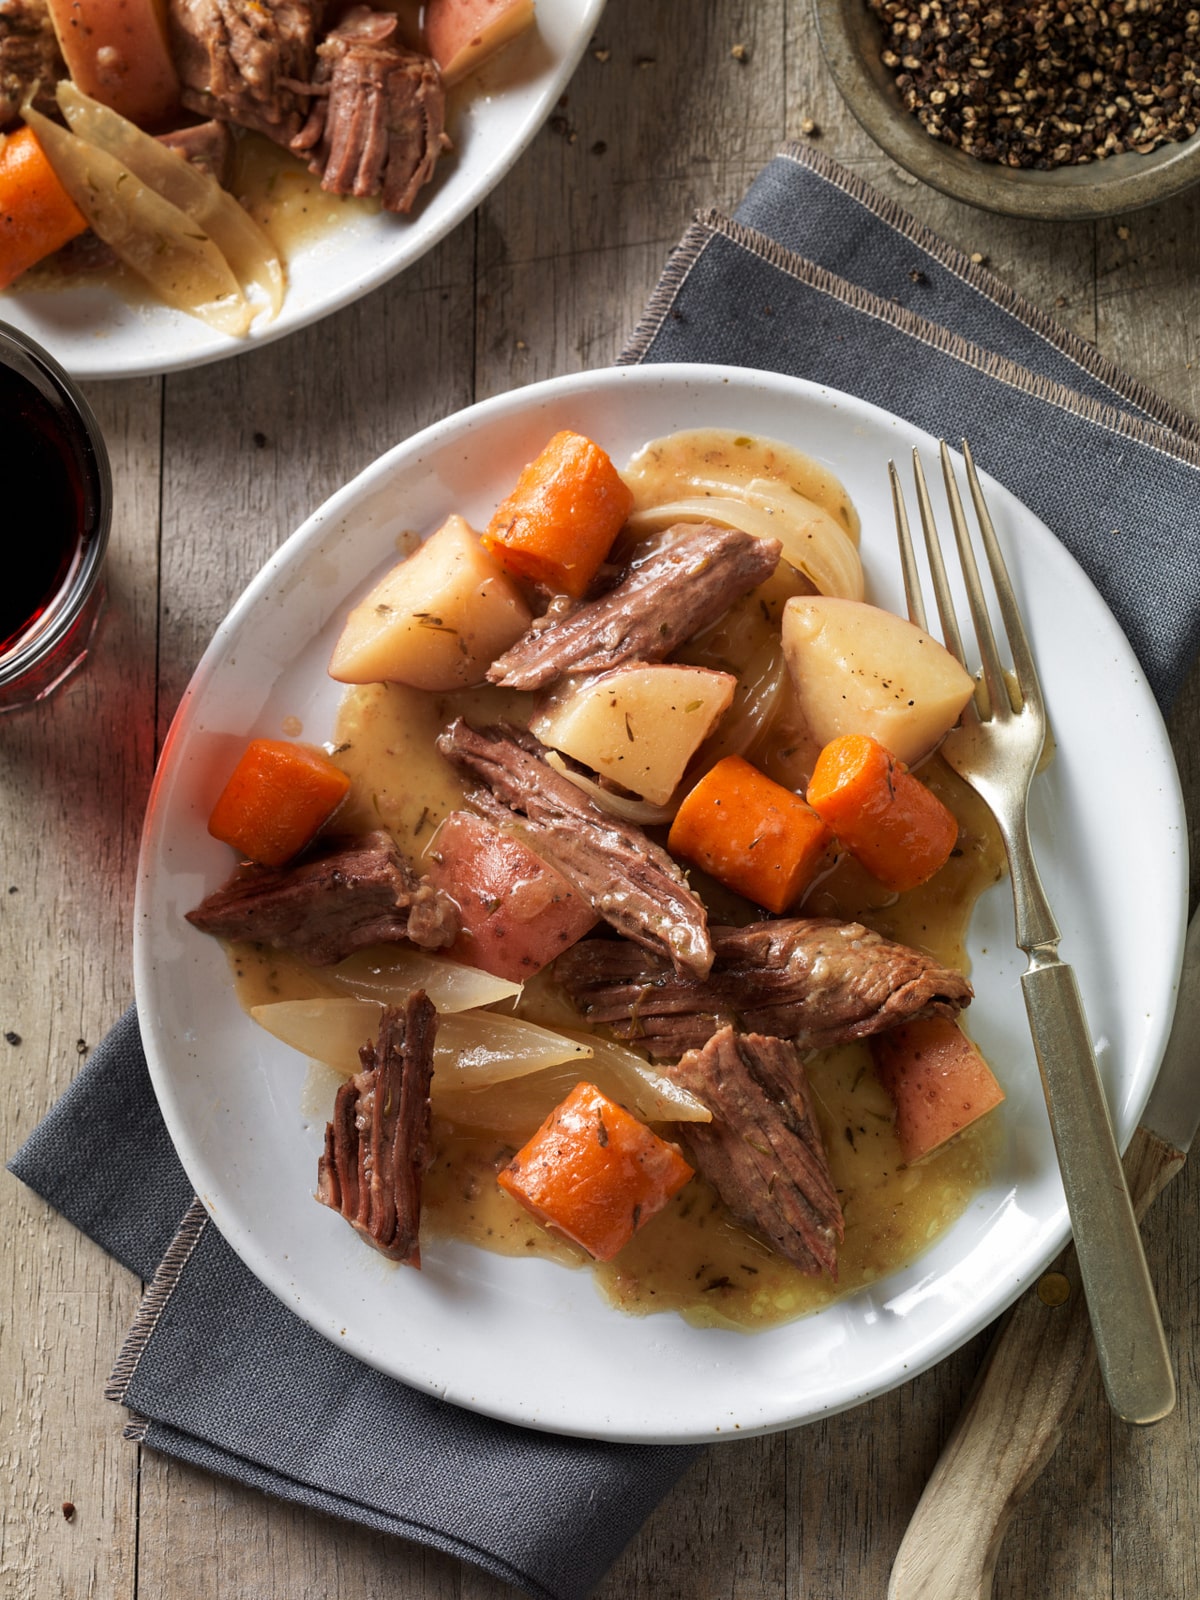 Beef pot roast pieces on a plate with roasted carrots, potatoes, and onions served with gravy.